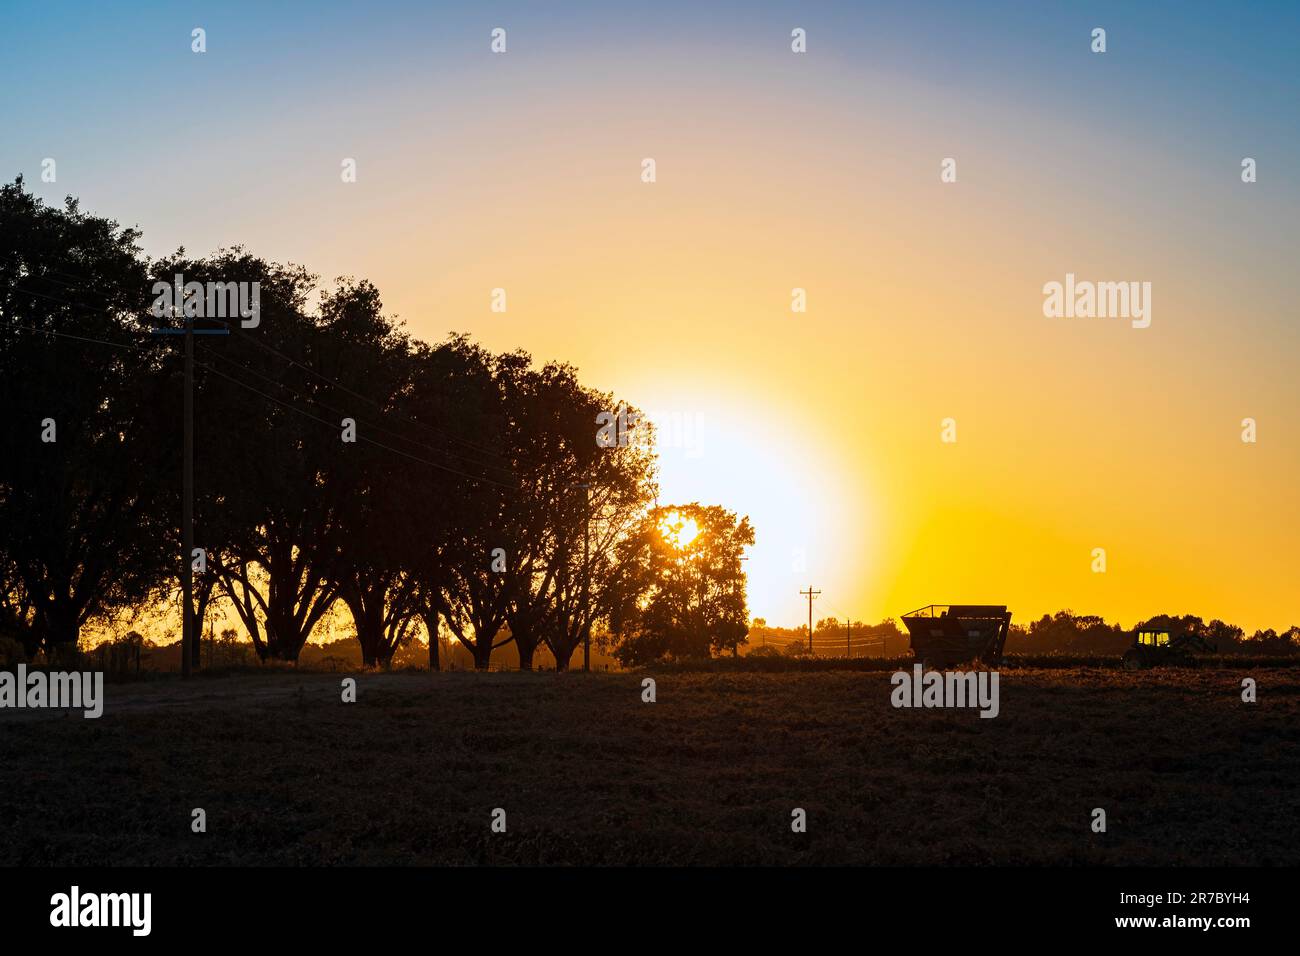 Agriculture background of a beautiful vivid sunset on the farm overlooking a newly dug peanut field with silhouetes of farm equiptment and trees in th Stock Photo